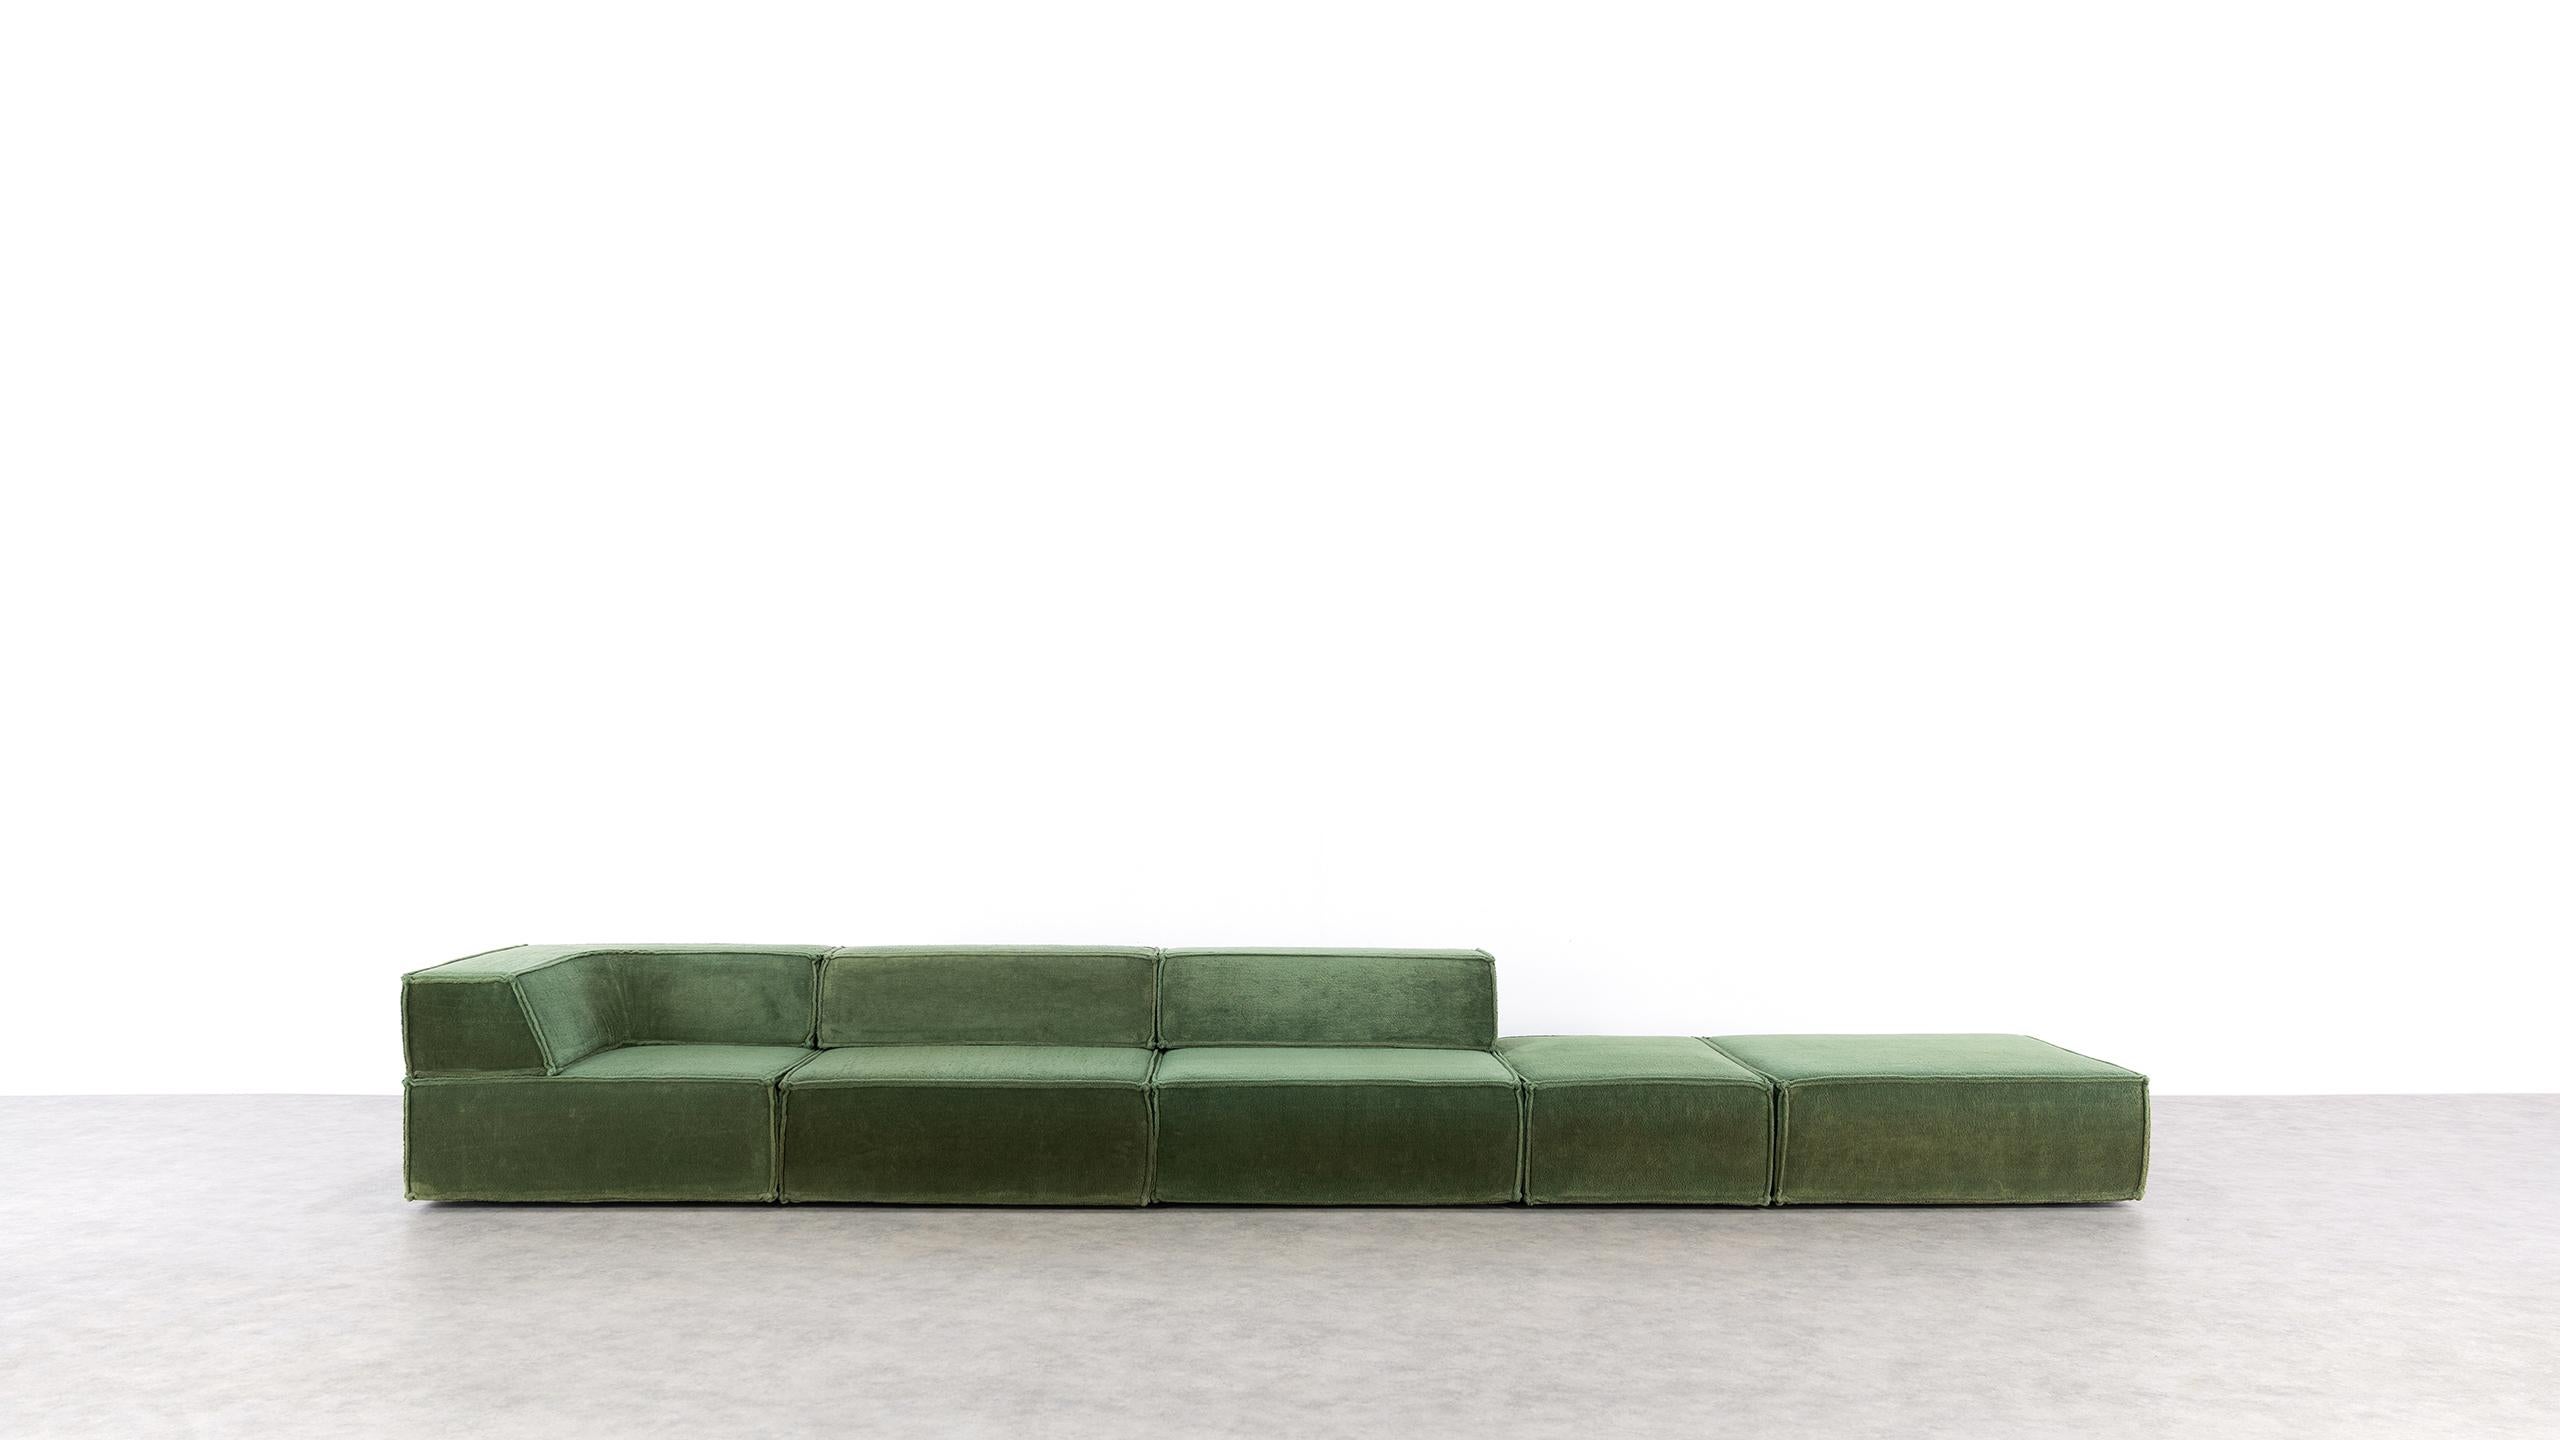 The modular sofa system, which was created in 1972 by Team Form AG in Switzerland for COR, blends seamlessly into any environment. Taking the backrest away it can also be used as a very comfortable bed.

The double outer seam lends trio an